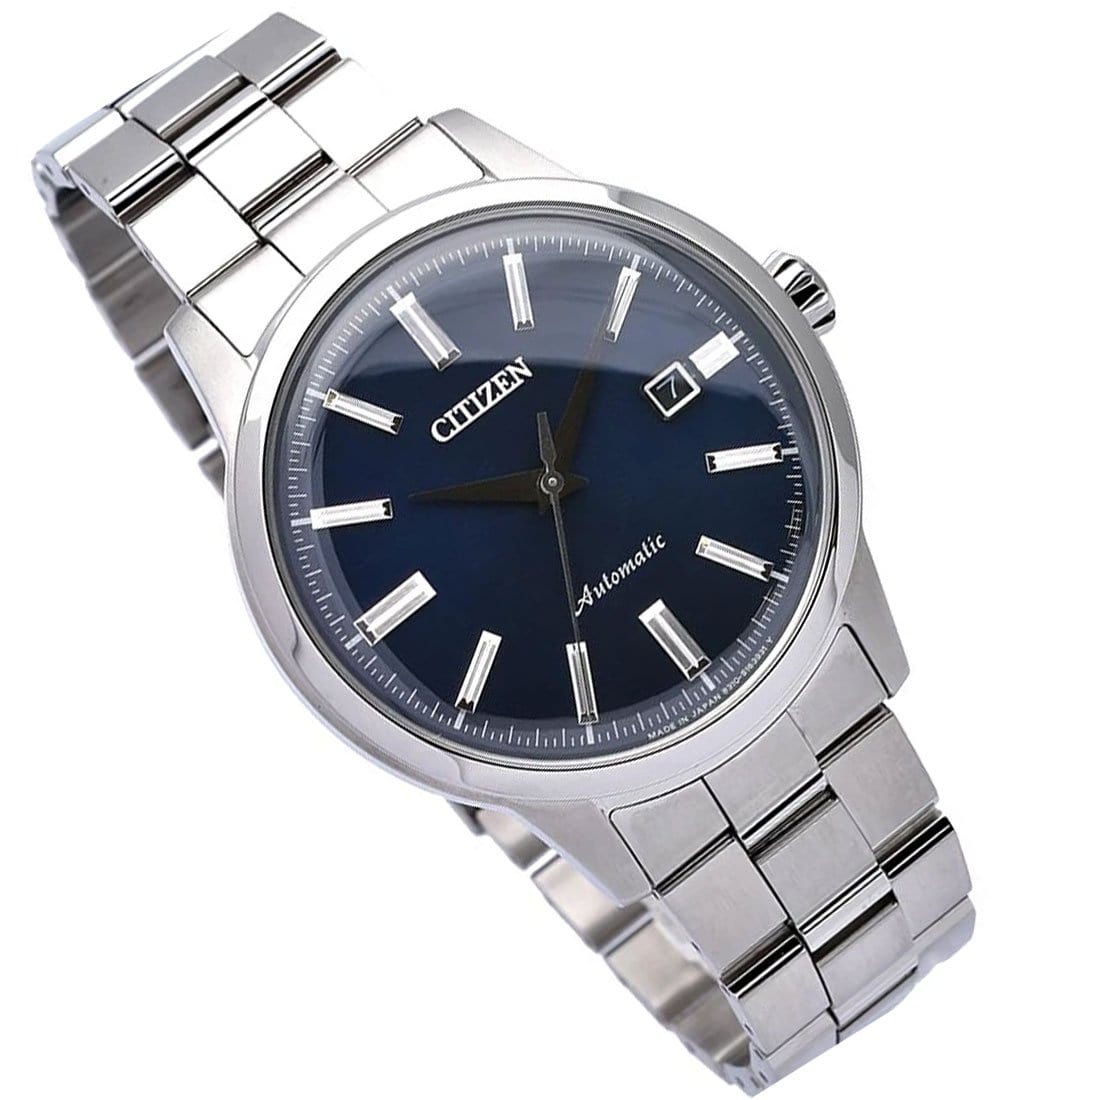 NK0000-95L Citizen Automatic Blue Dial Analog Made in Japan Watch